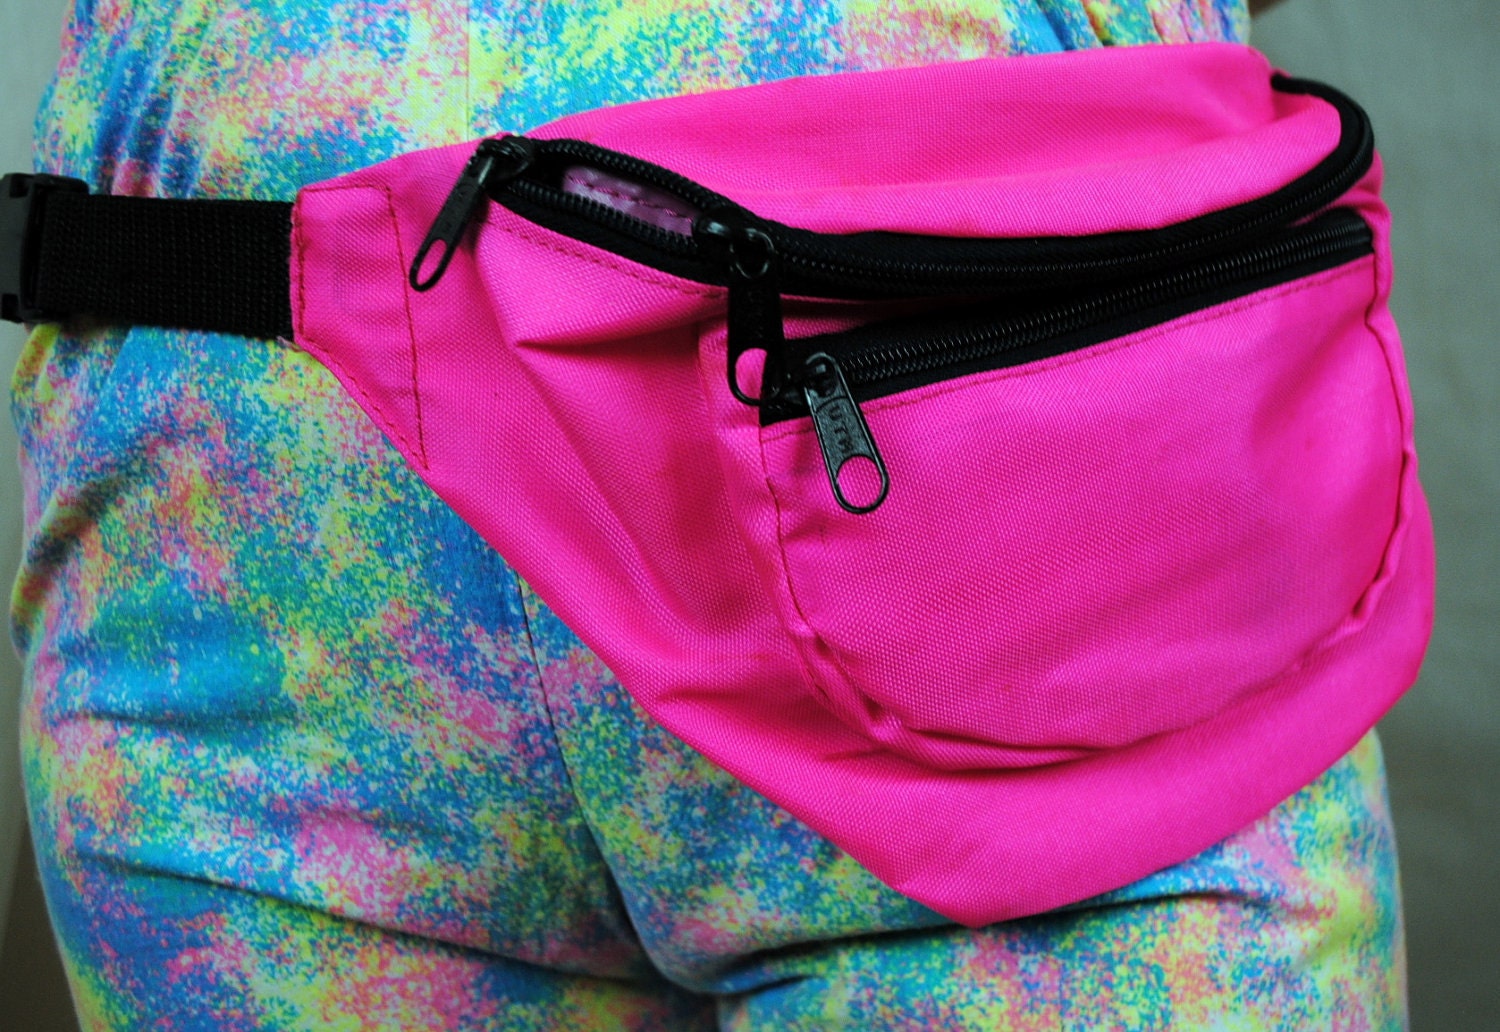 Vintage 80s Hot Pink NEON Fanny Pack